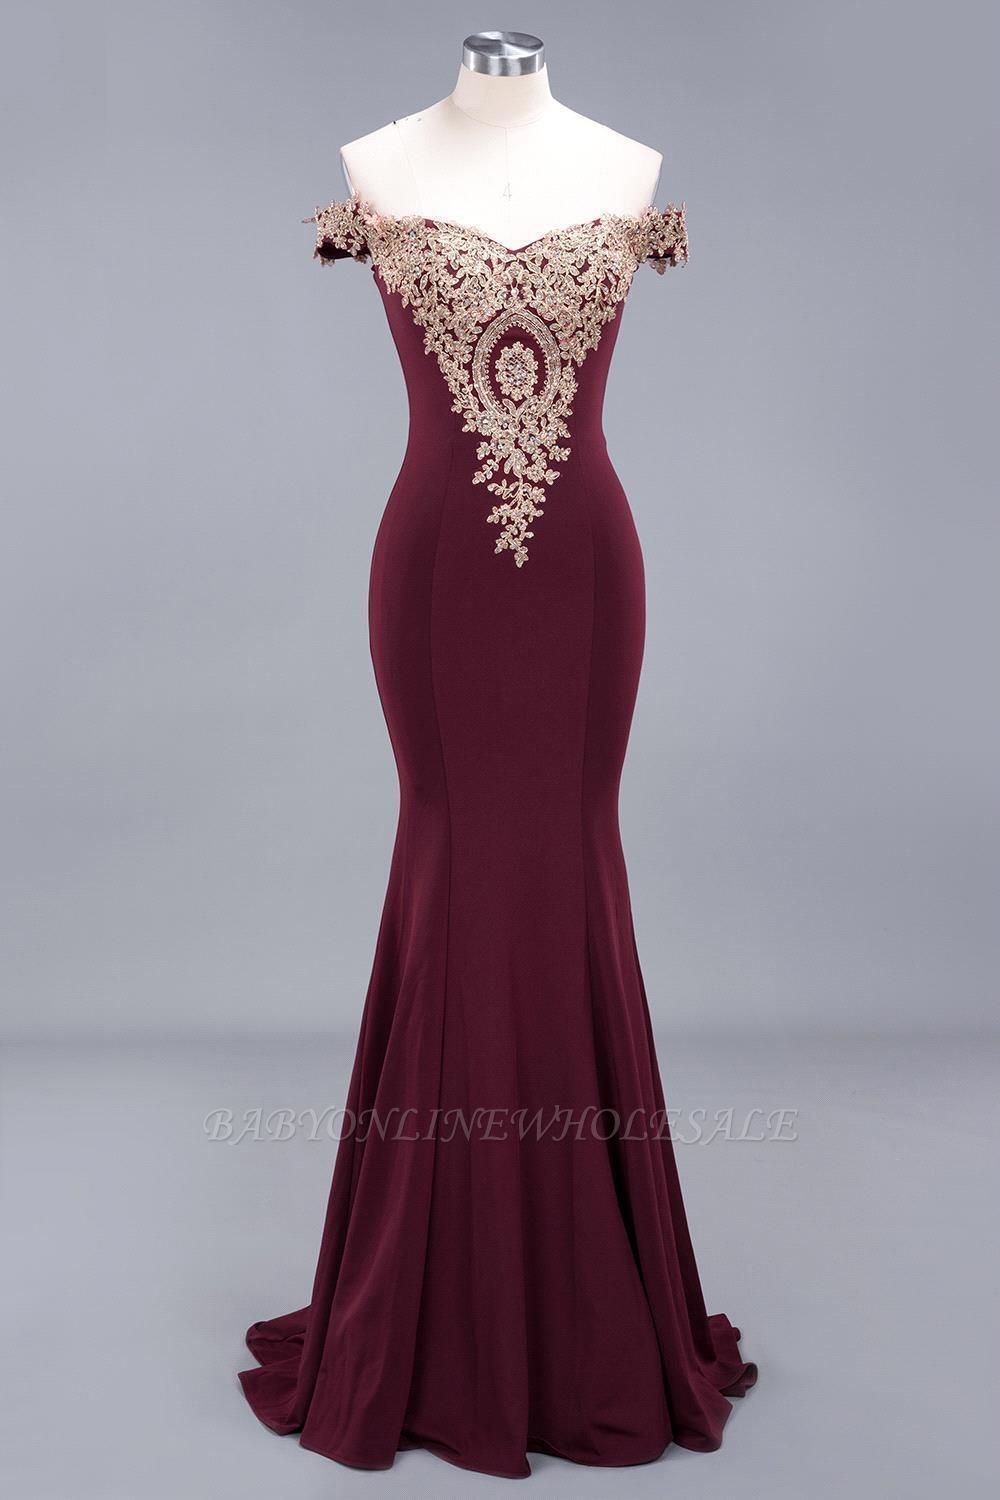 Simple Off-the-shoulder Burgundy Formal Dress with Lace Appliques ...